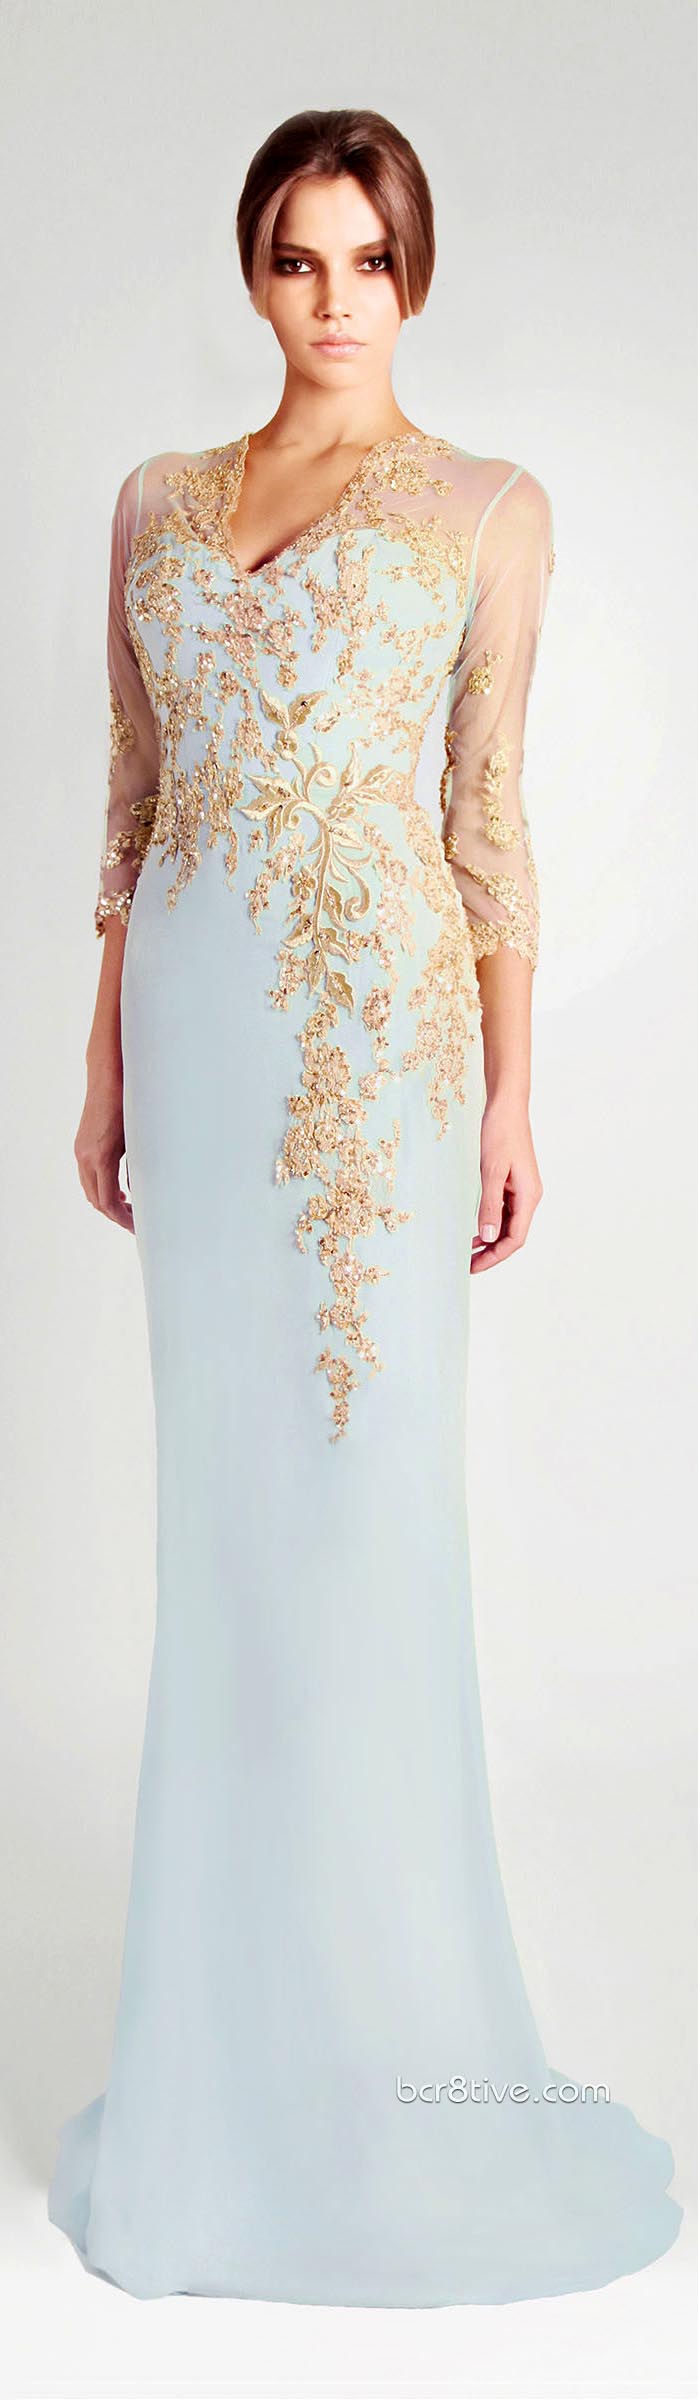 Georges Hobeika SS 2013 RTW Signature Collection